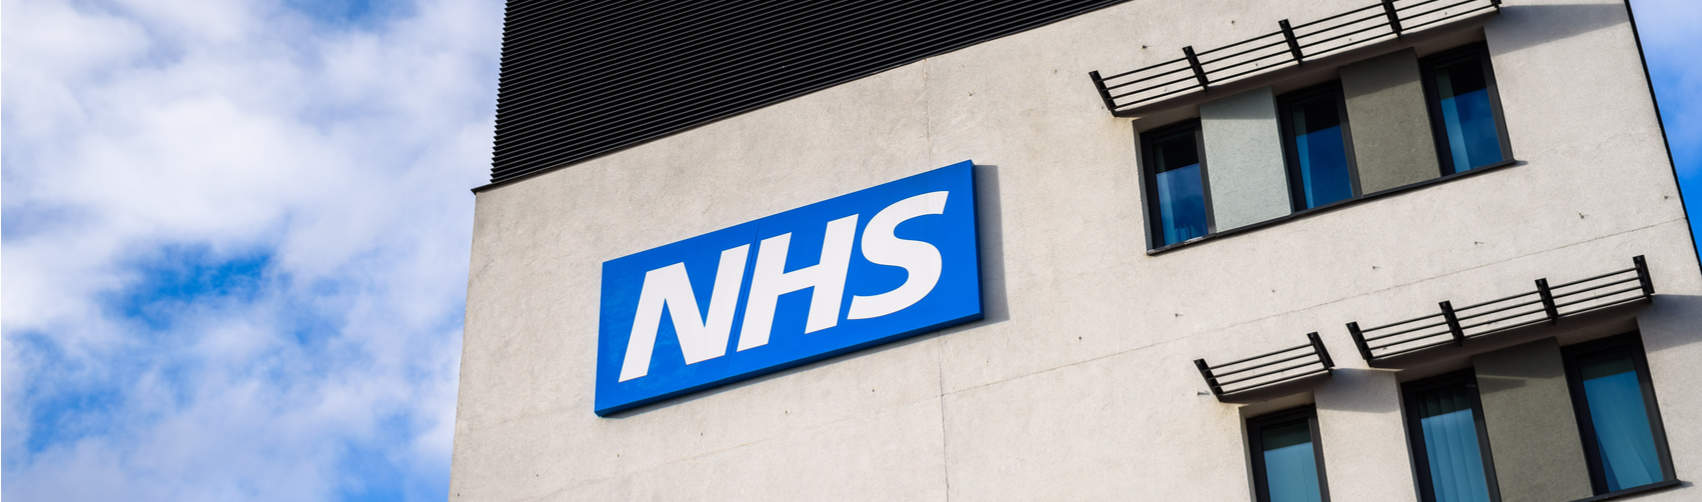 NHS long-term plan could save 500,000 lives